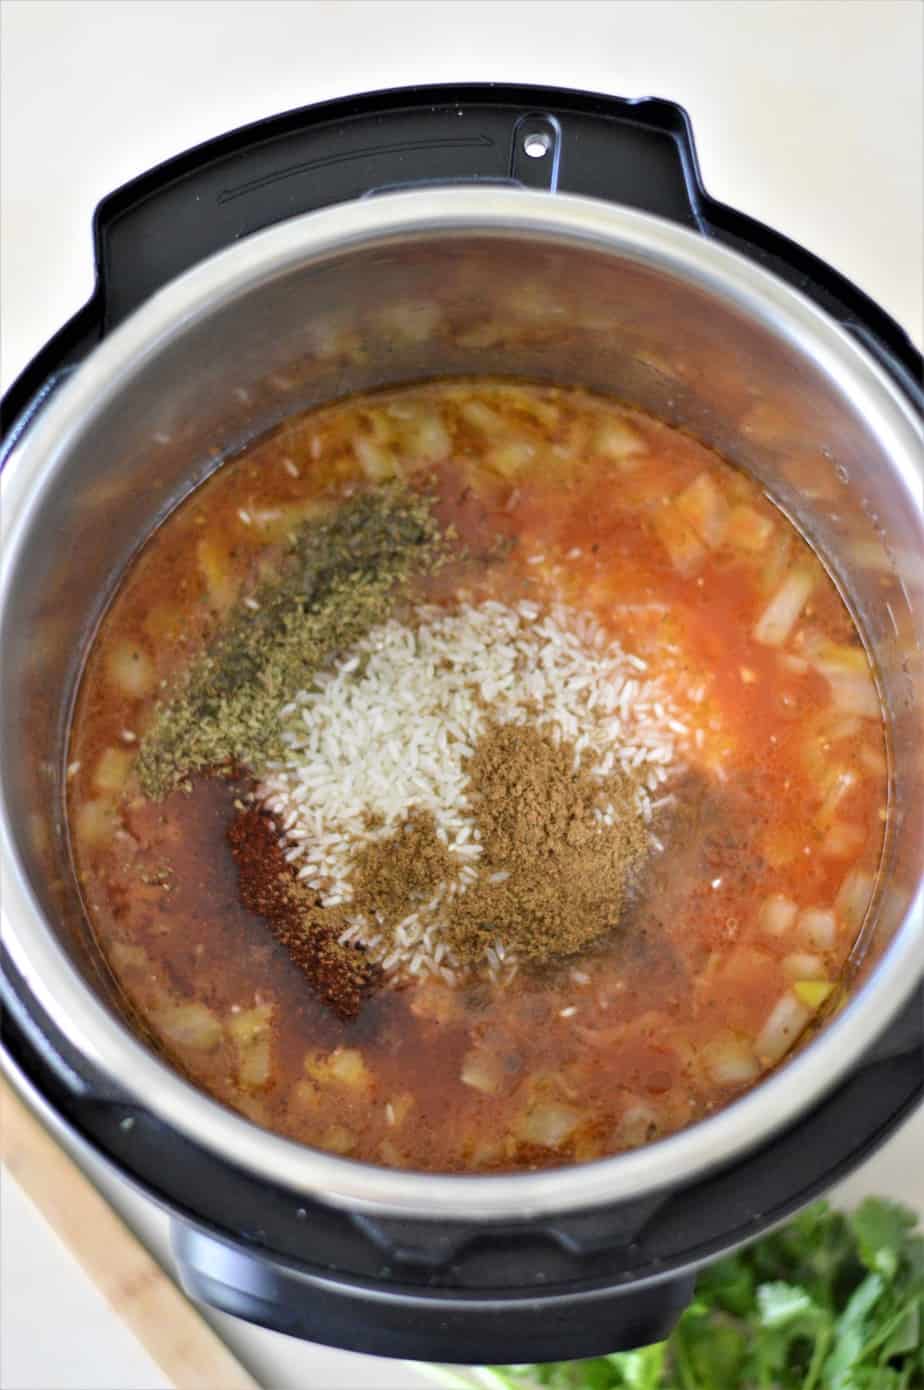 rice, water, tomato sauce, chopped onions and spices in Instant Pot